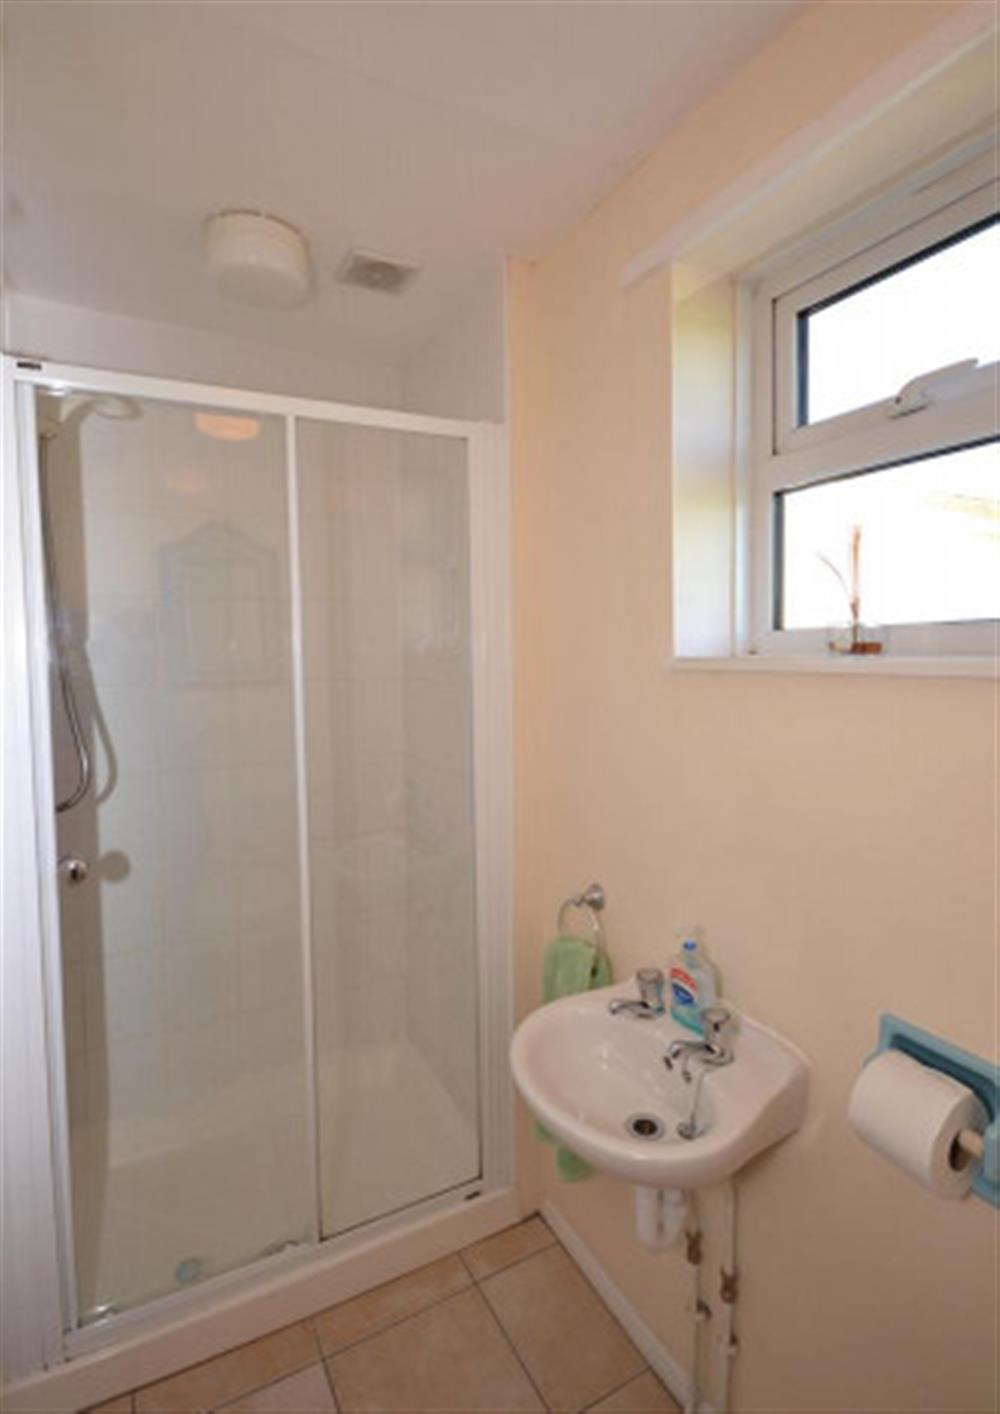 First floor shower room at Thorpe Arnold Major in Thurlestone